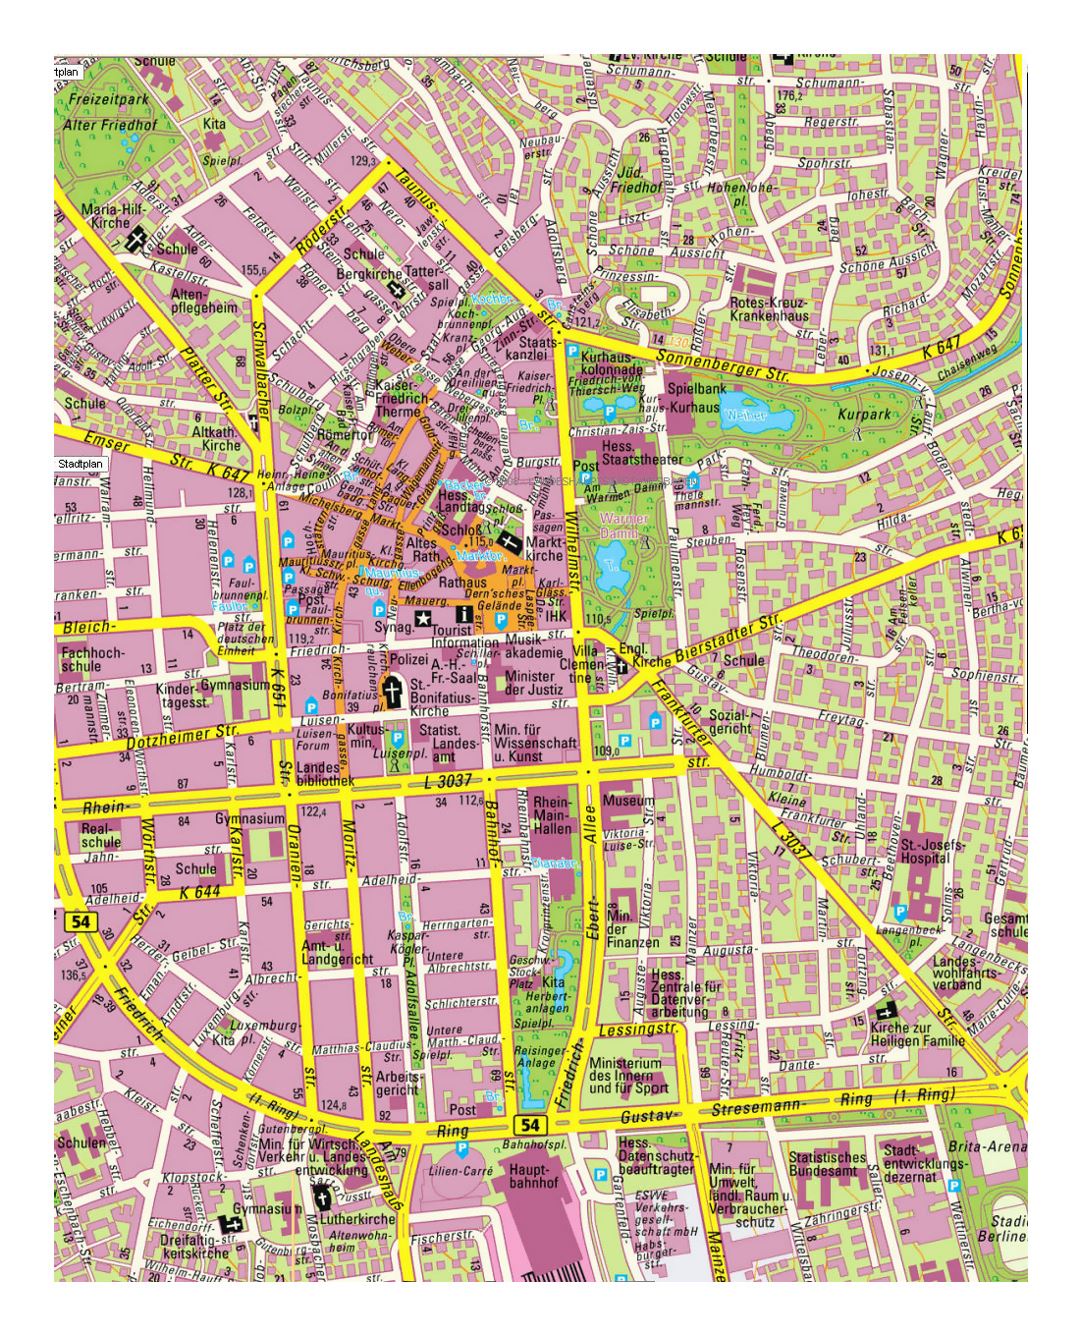 Detailed street map of central part of Wiesbaden